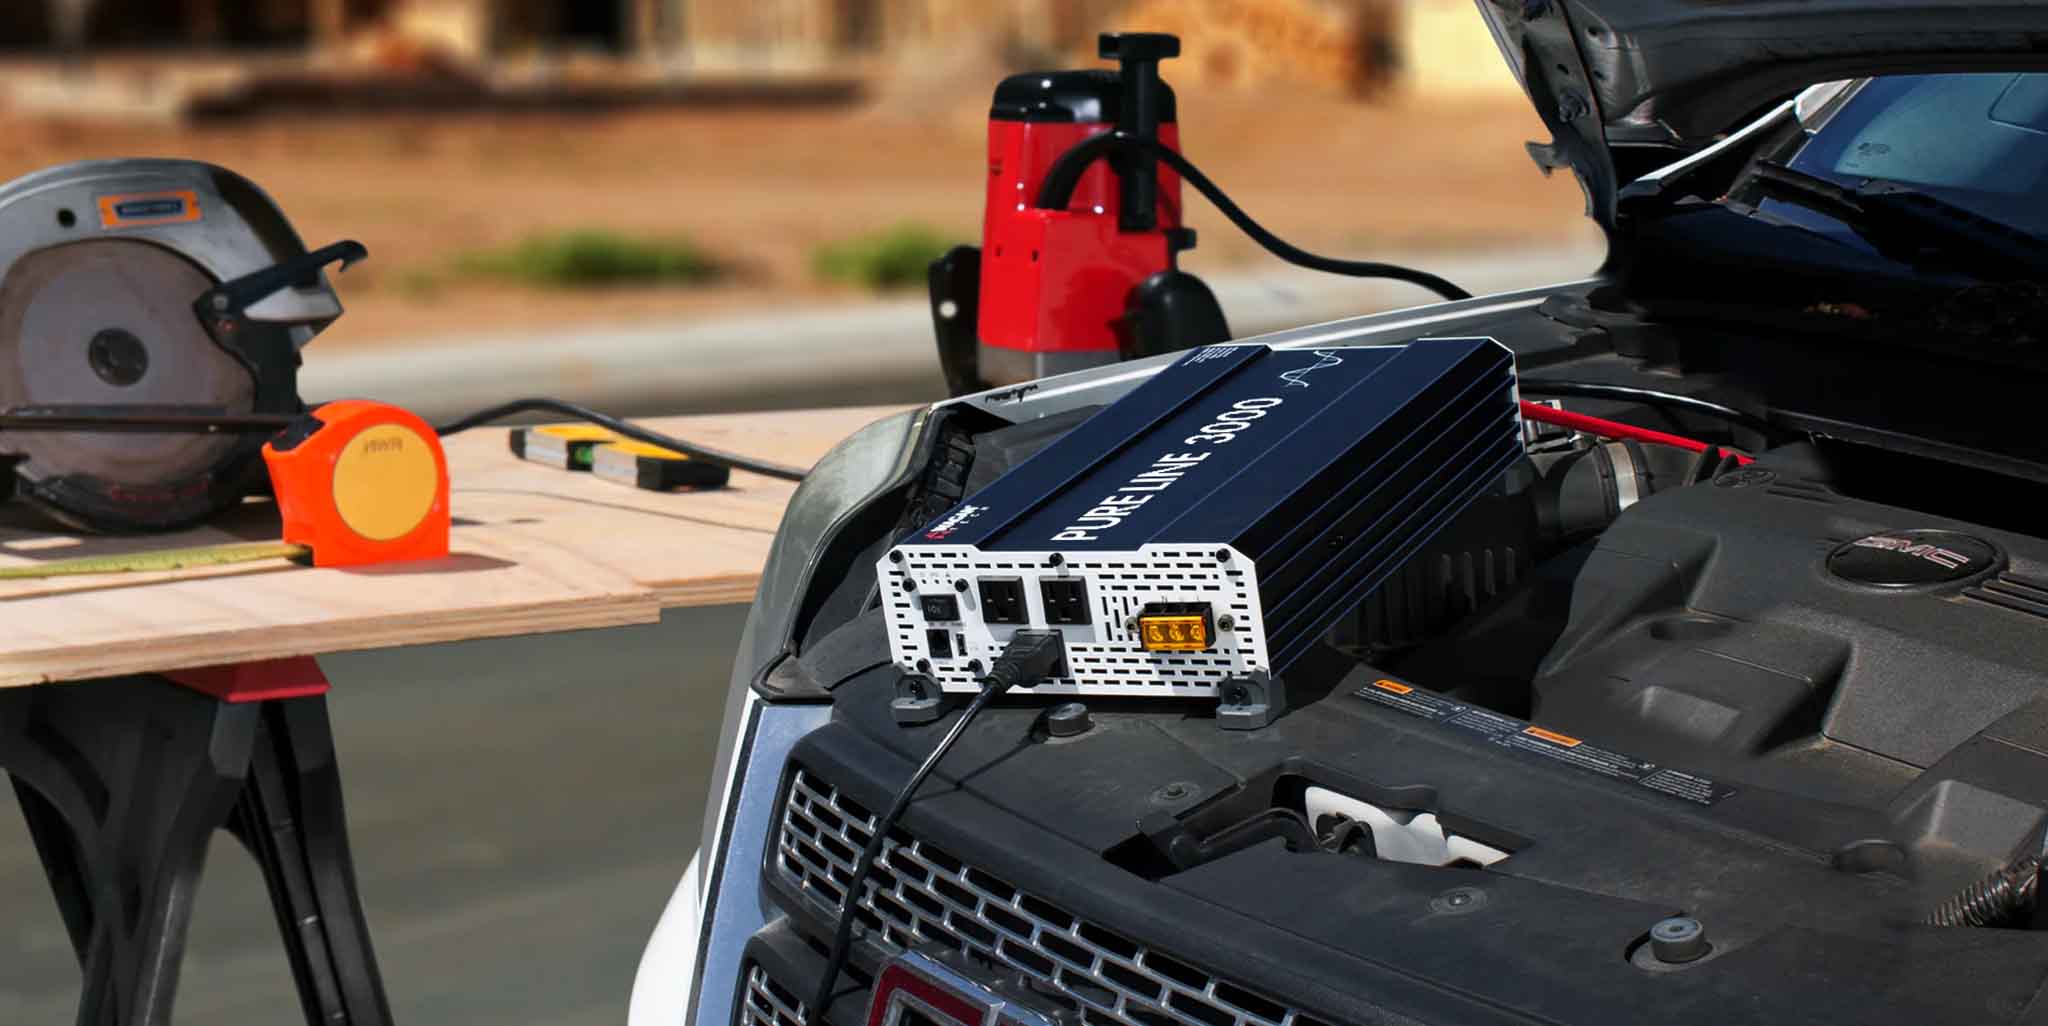 Power Inverter Connected To A Truck Battery At A Construction Site